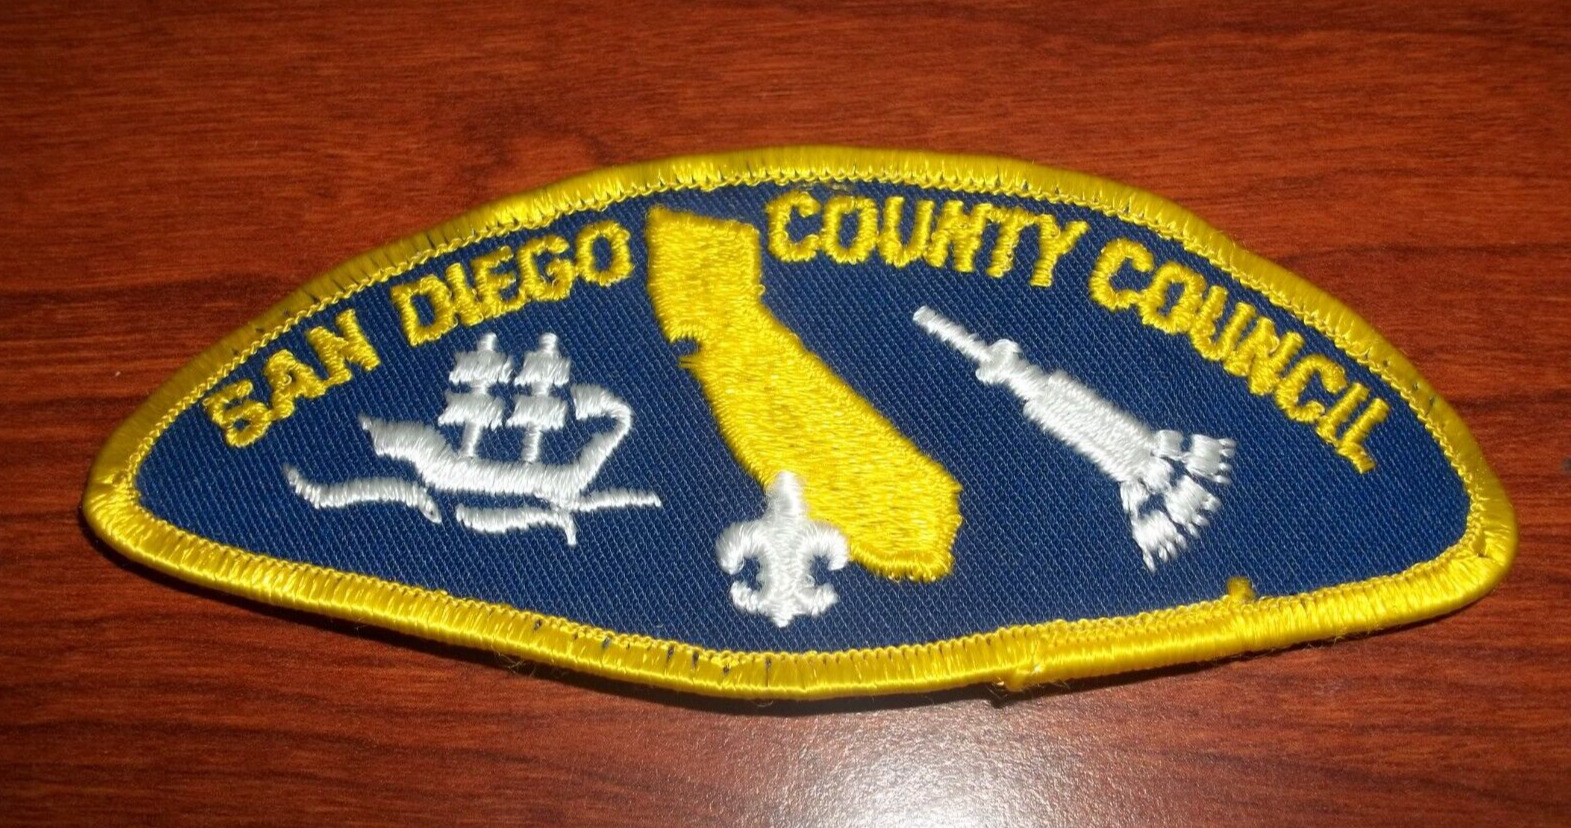 San Diego County Council Strip T-3 Plastic Back CSP Boy Scouts of America BSA